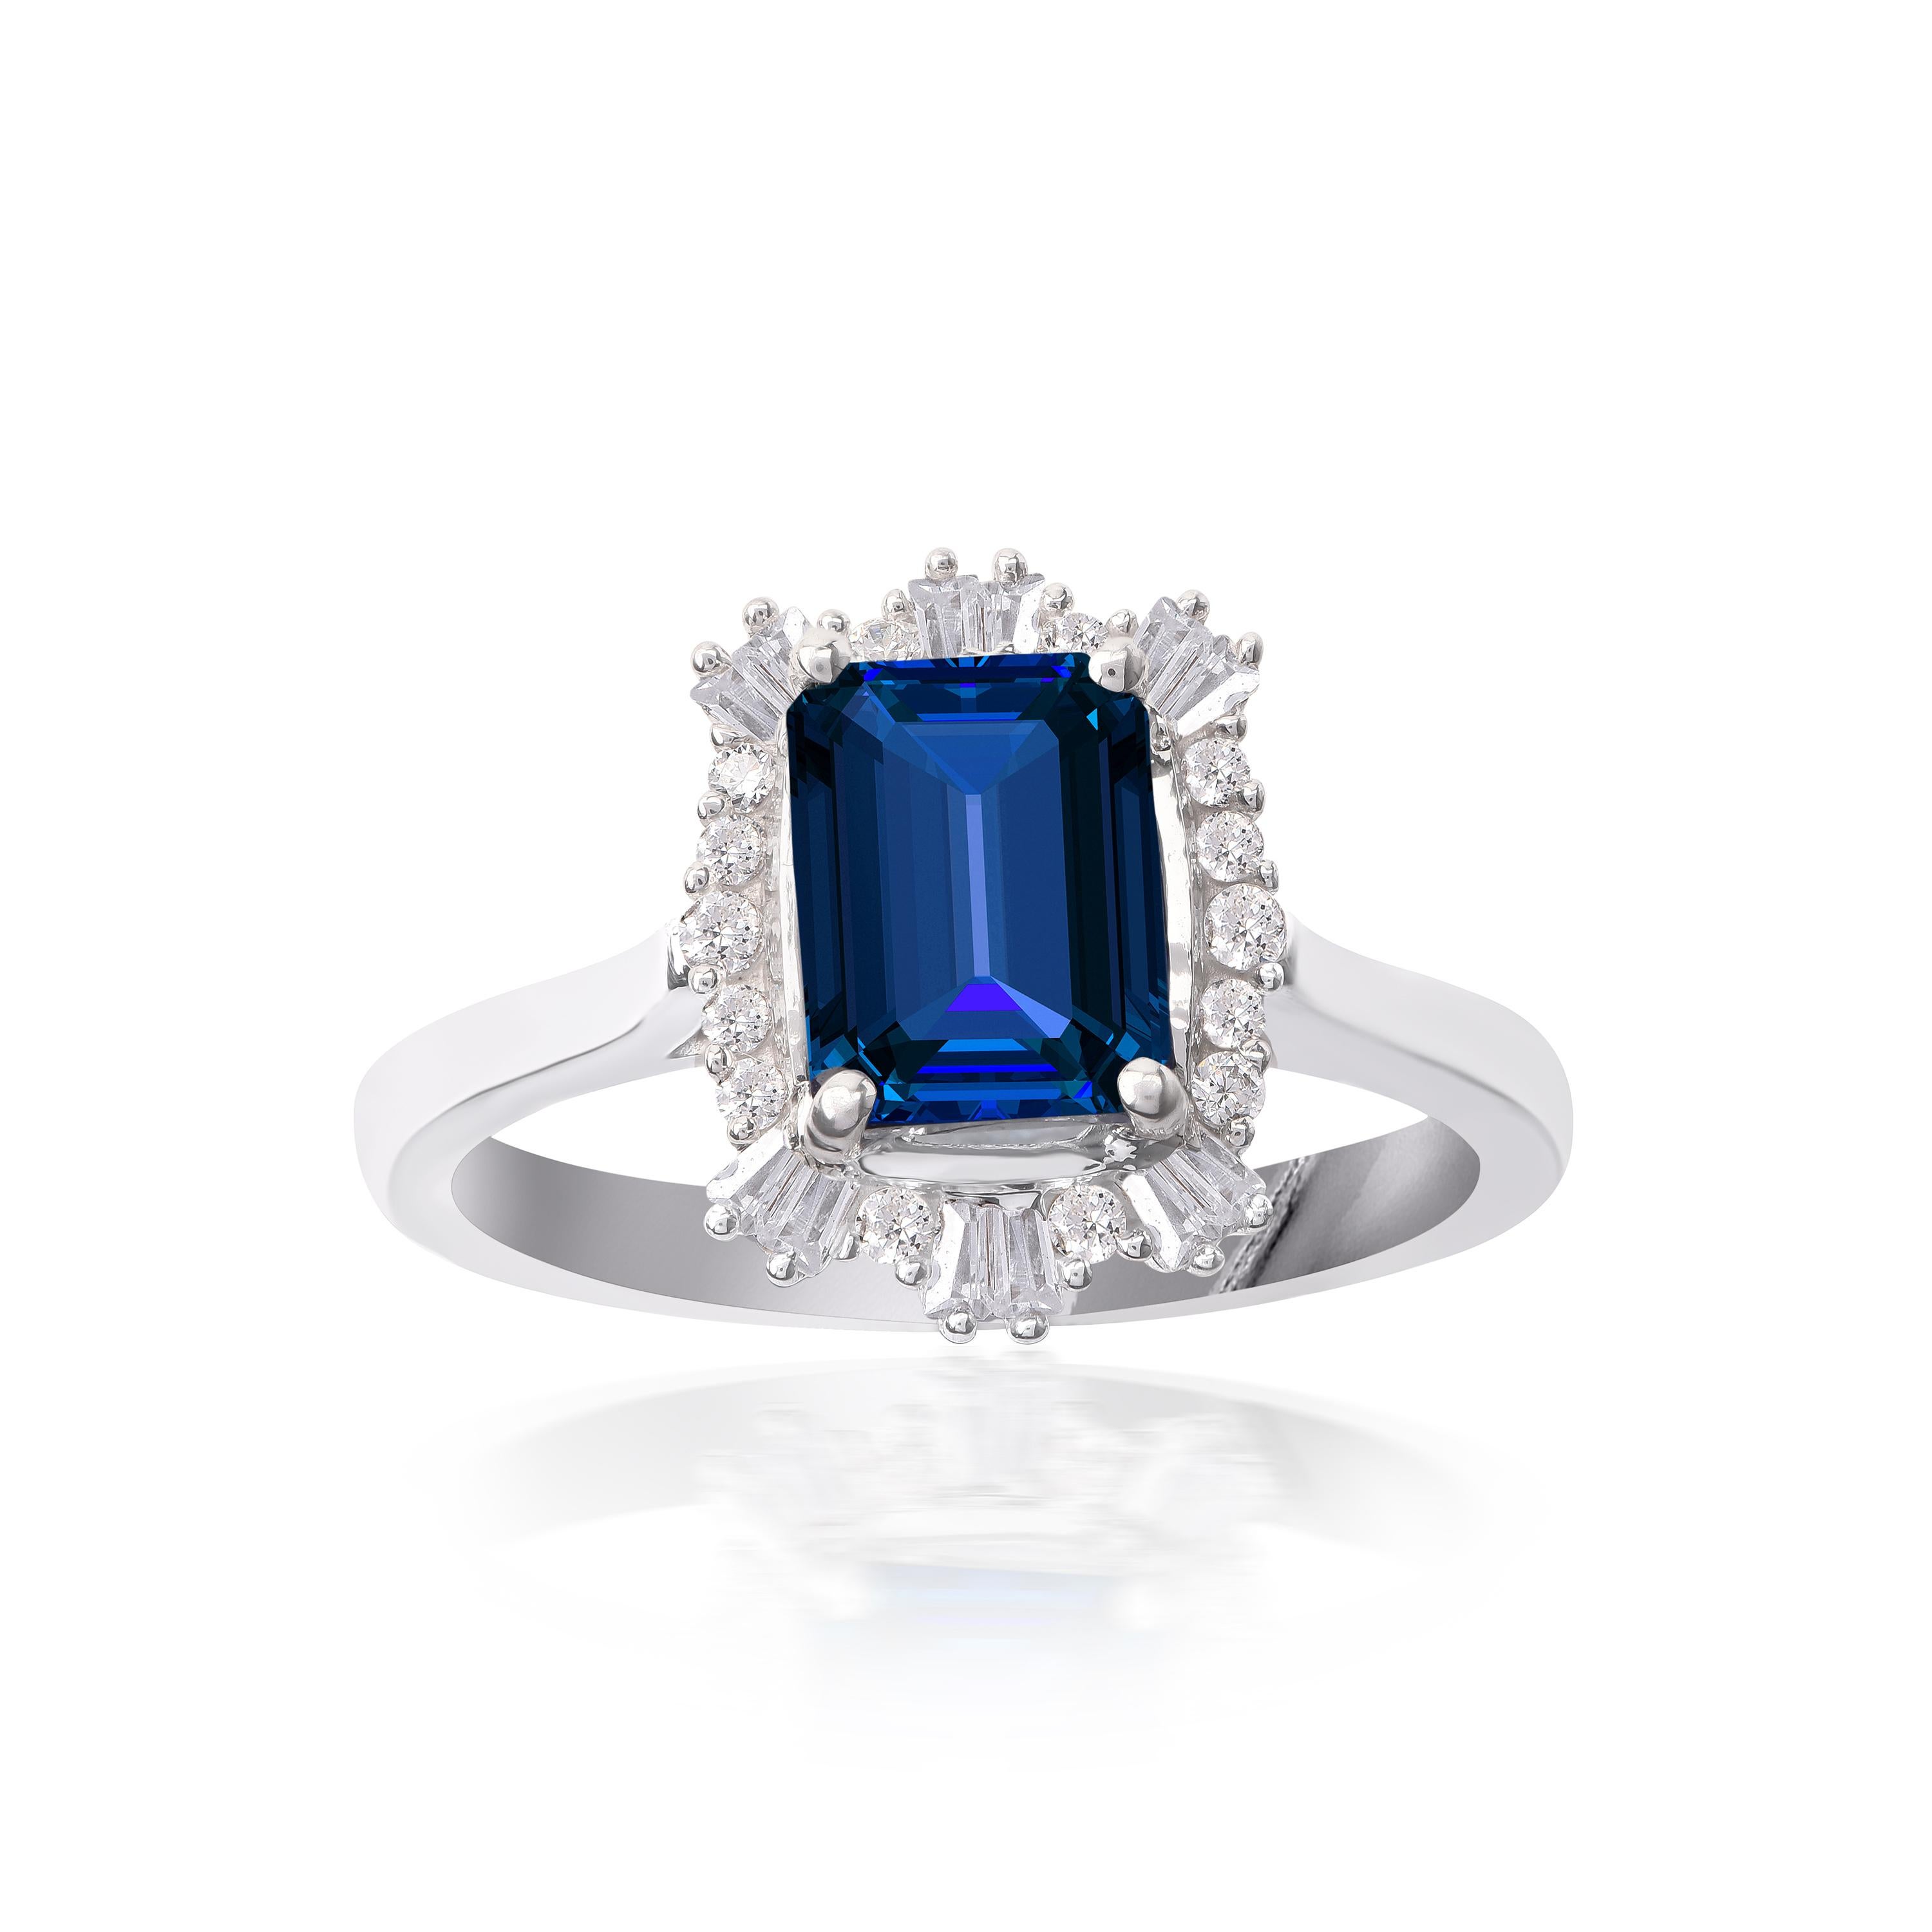 This stunning ring is made by our experts in 18-karat white gold and accentuated with 14 natural brilliant cut and 12 baguette-cut diamonds and 1 blue sapphire gemstone in prong and bezel setting. The diamonds are graded H-I Color, I2 Clarity.